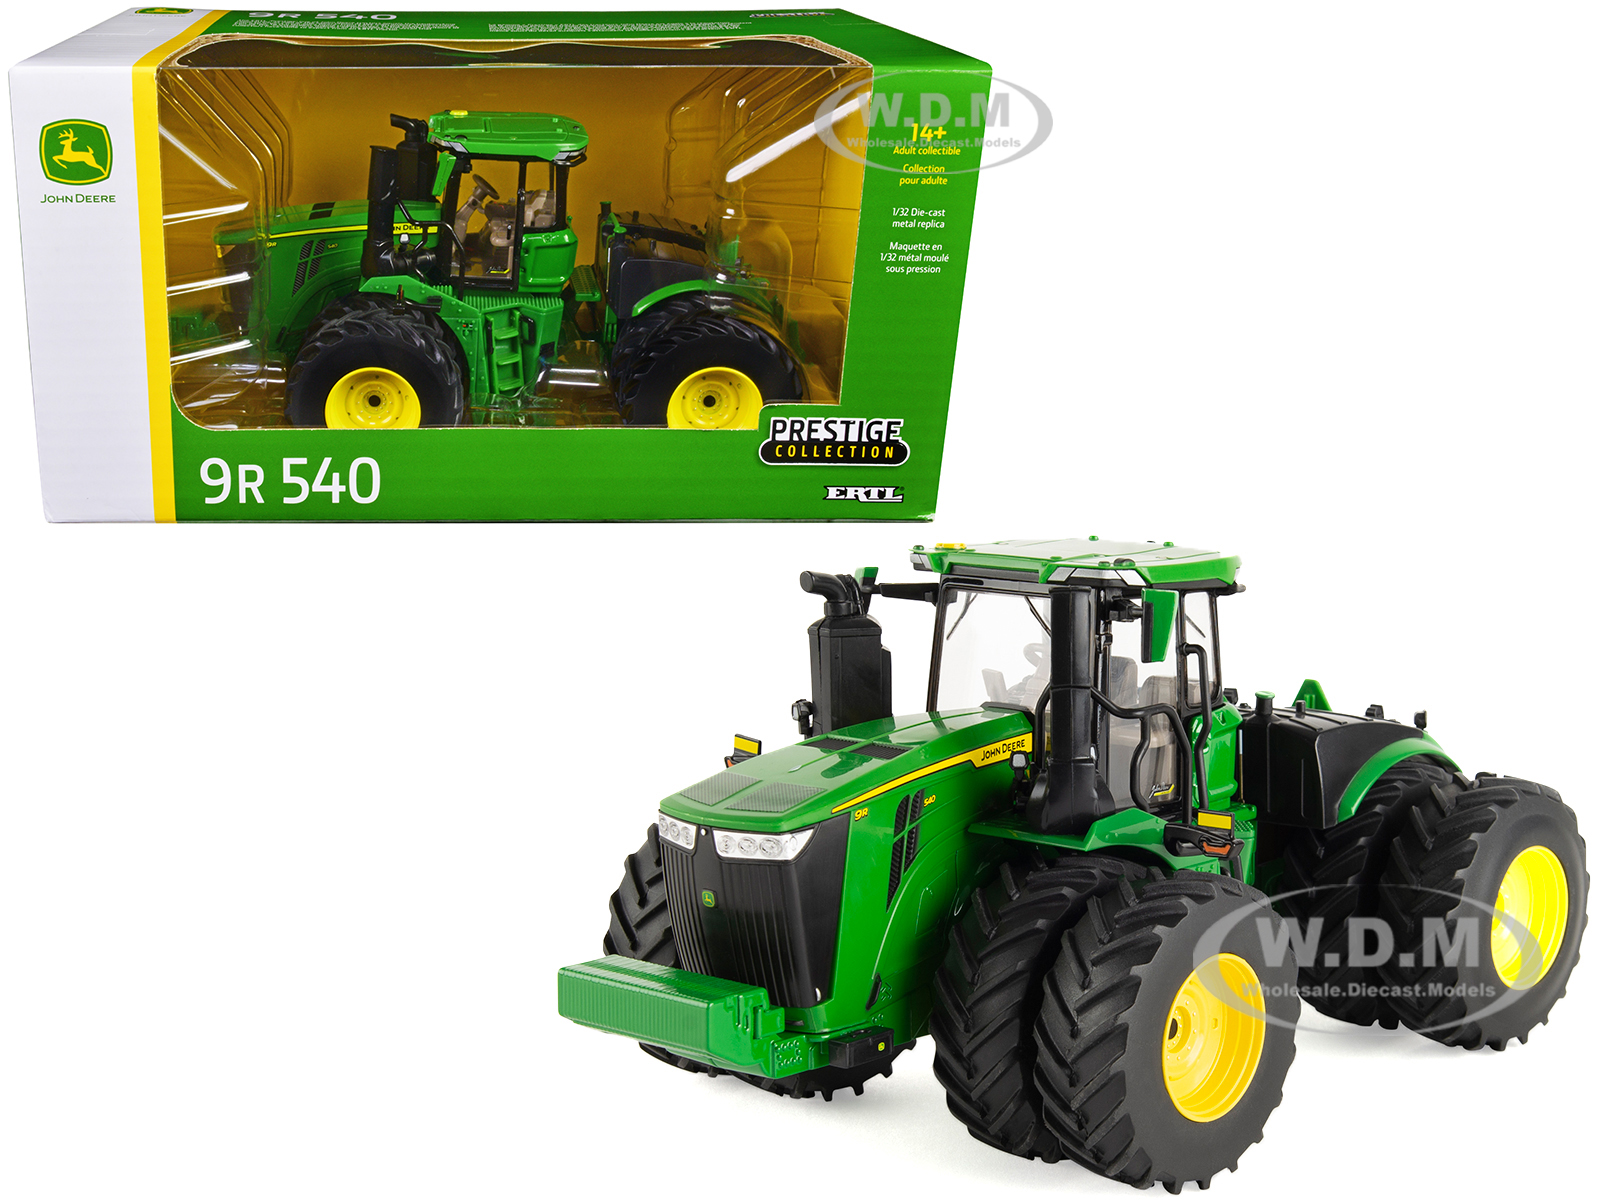 John Deere 9R 540 Tractor with Dual Wheels Green "Prestige Collection" 1/32 Diecast Model by ERTL TOMY